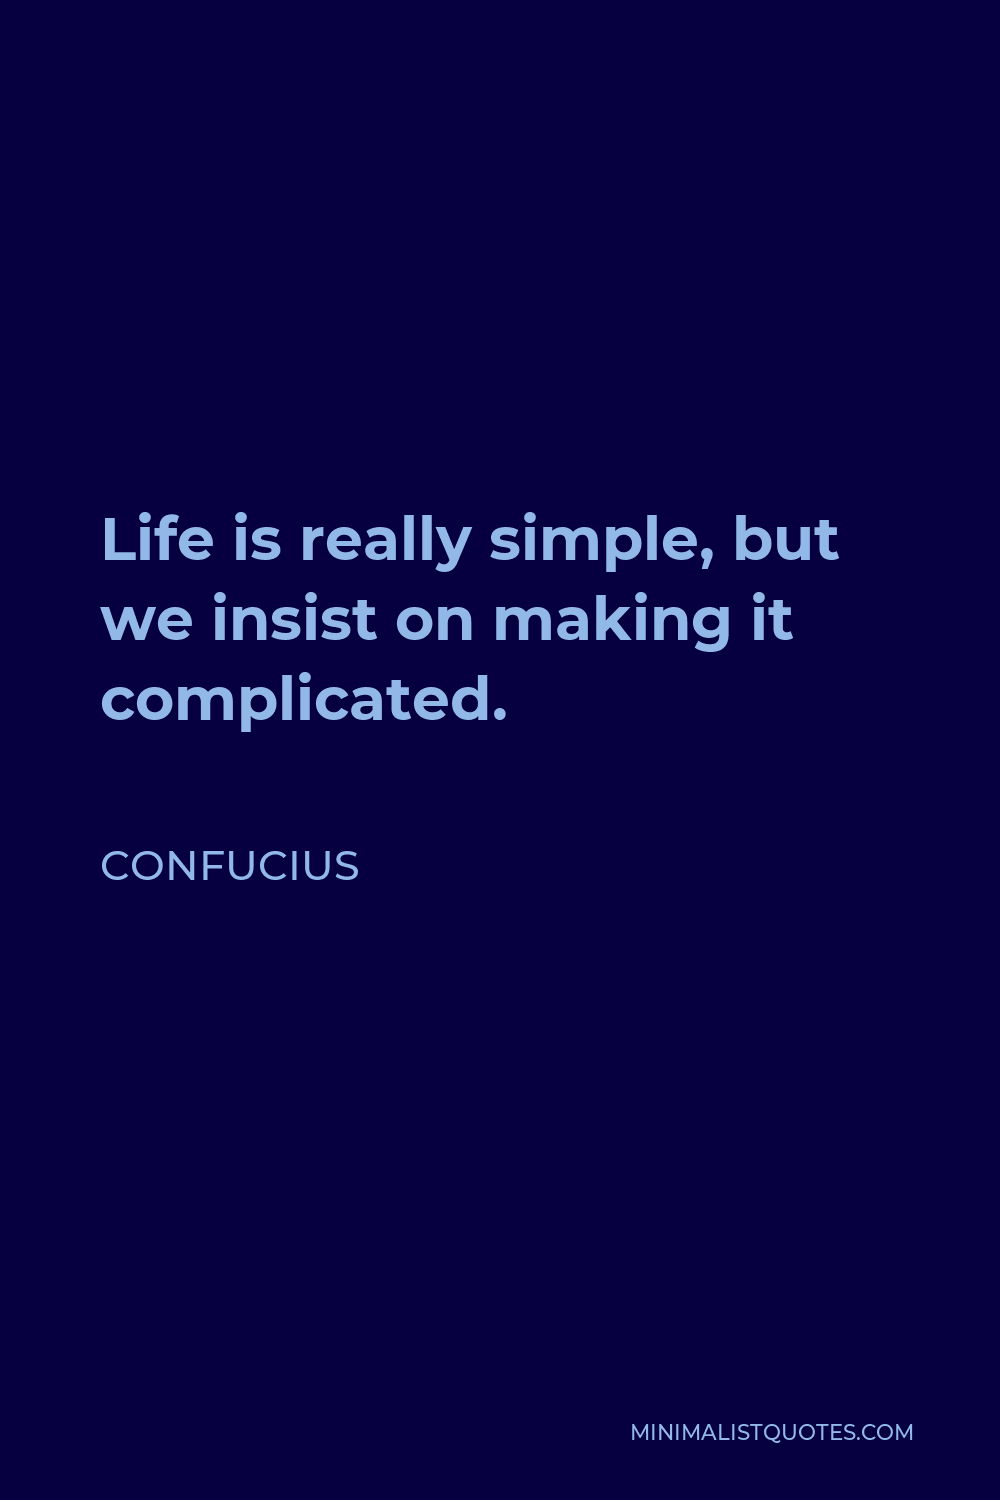 Confucius Quote - Life is really simple, but we insist on making it complicated.